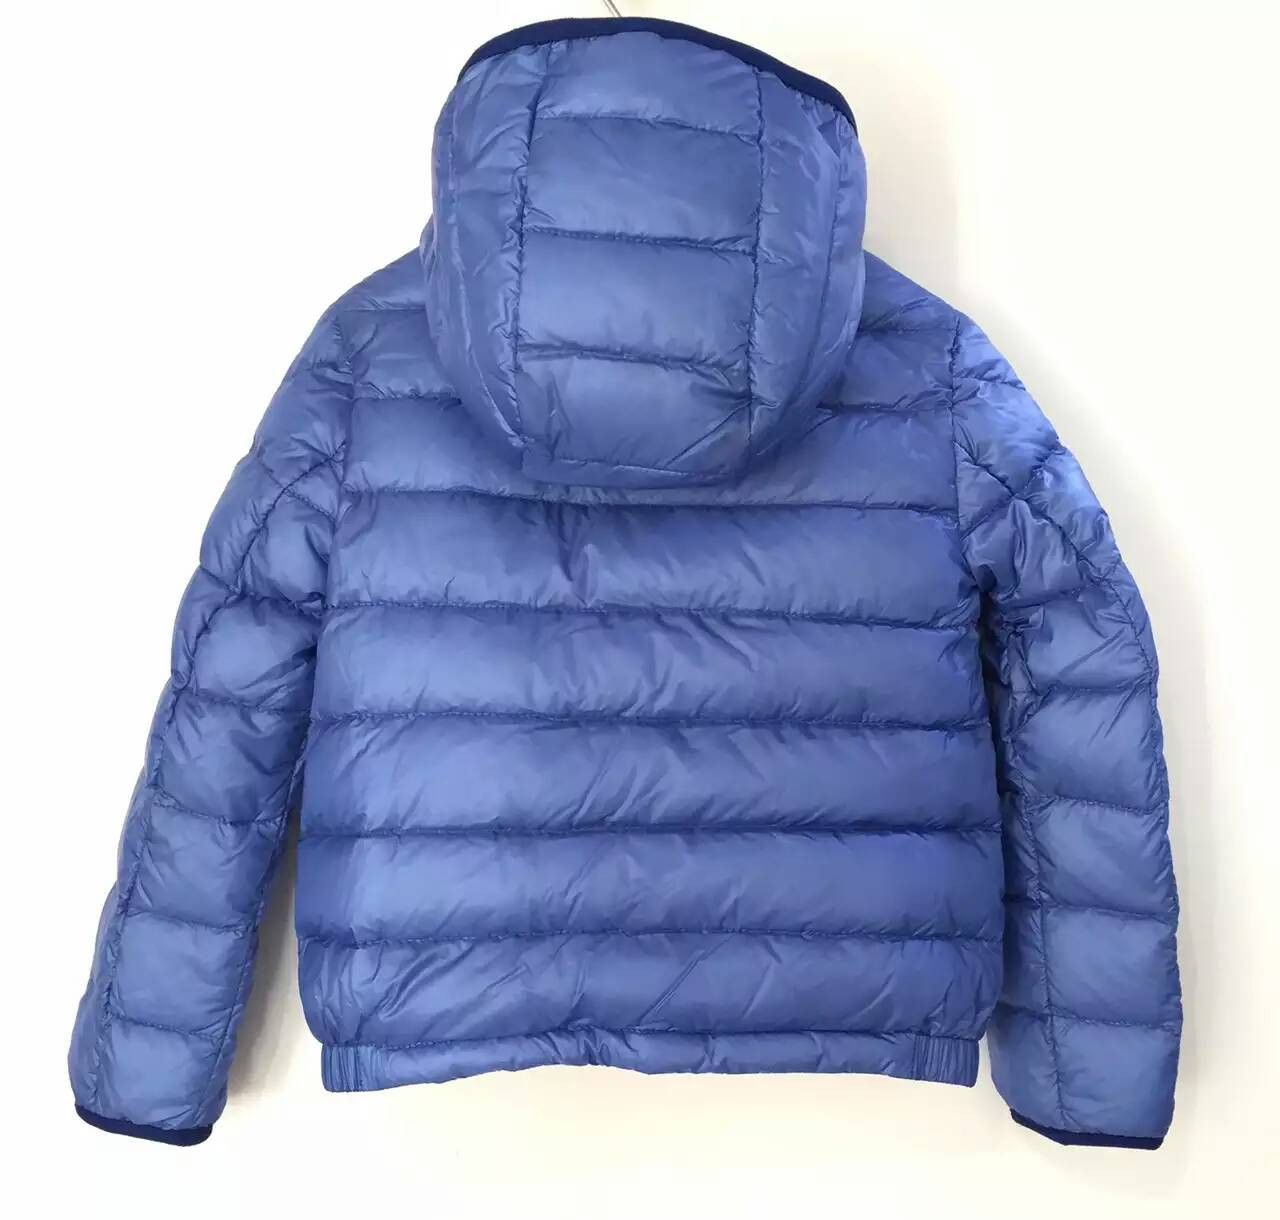 Boys Blue Down Padded Hooded 'Athenes' Jacket With Hidden Pocket - CÉMAROSE | Children's Fashion Store - 2